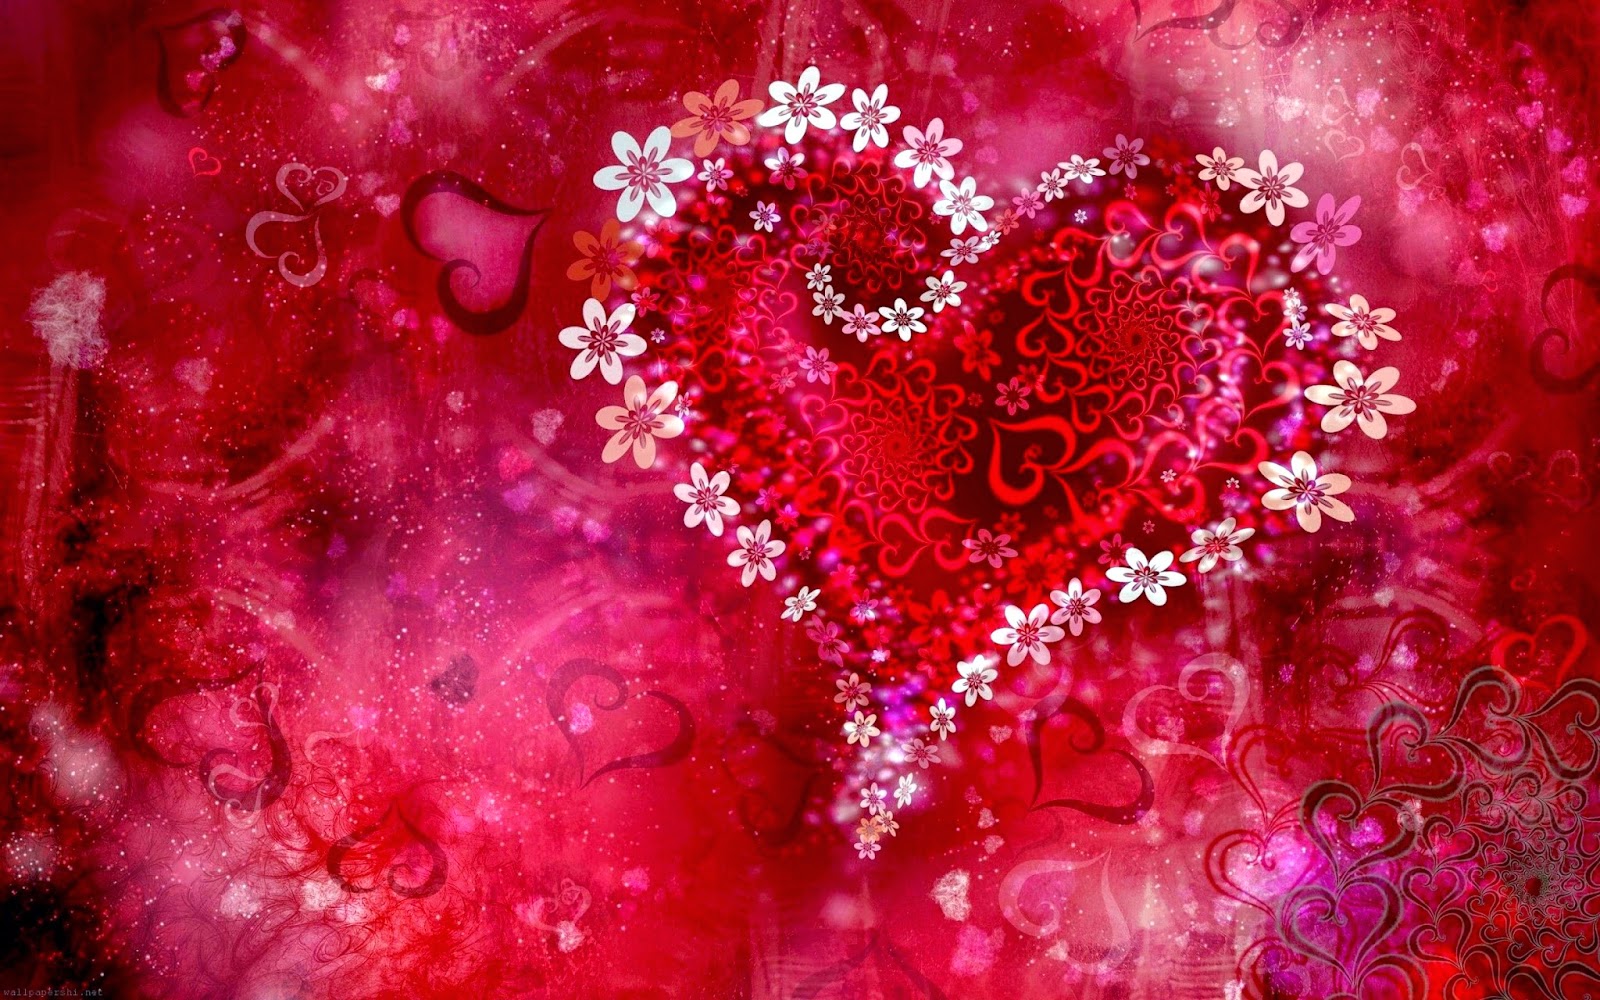 Gallery For Gt Pink Hearts And Flowers Wallpaper